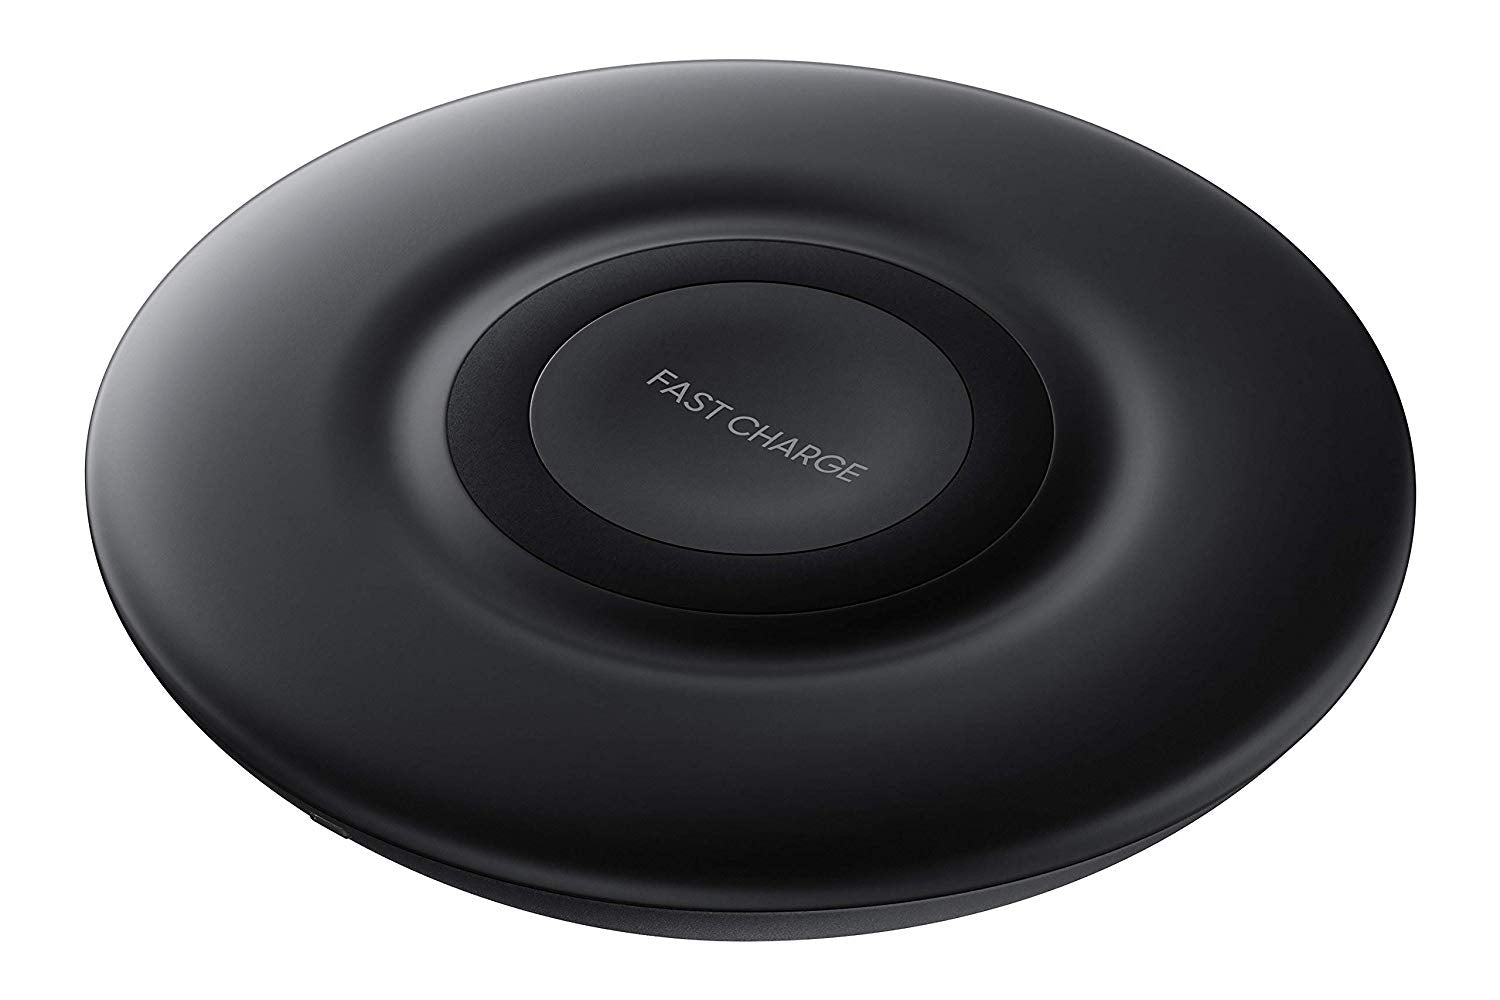 Samsung Wireless Charger Fast Charge Pad (2018) (EP-P3100) - Black (Refurbished)